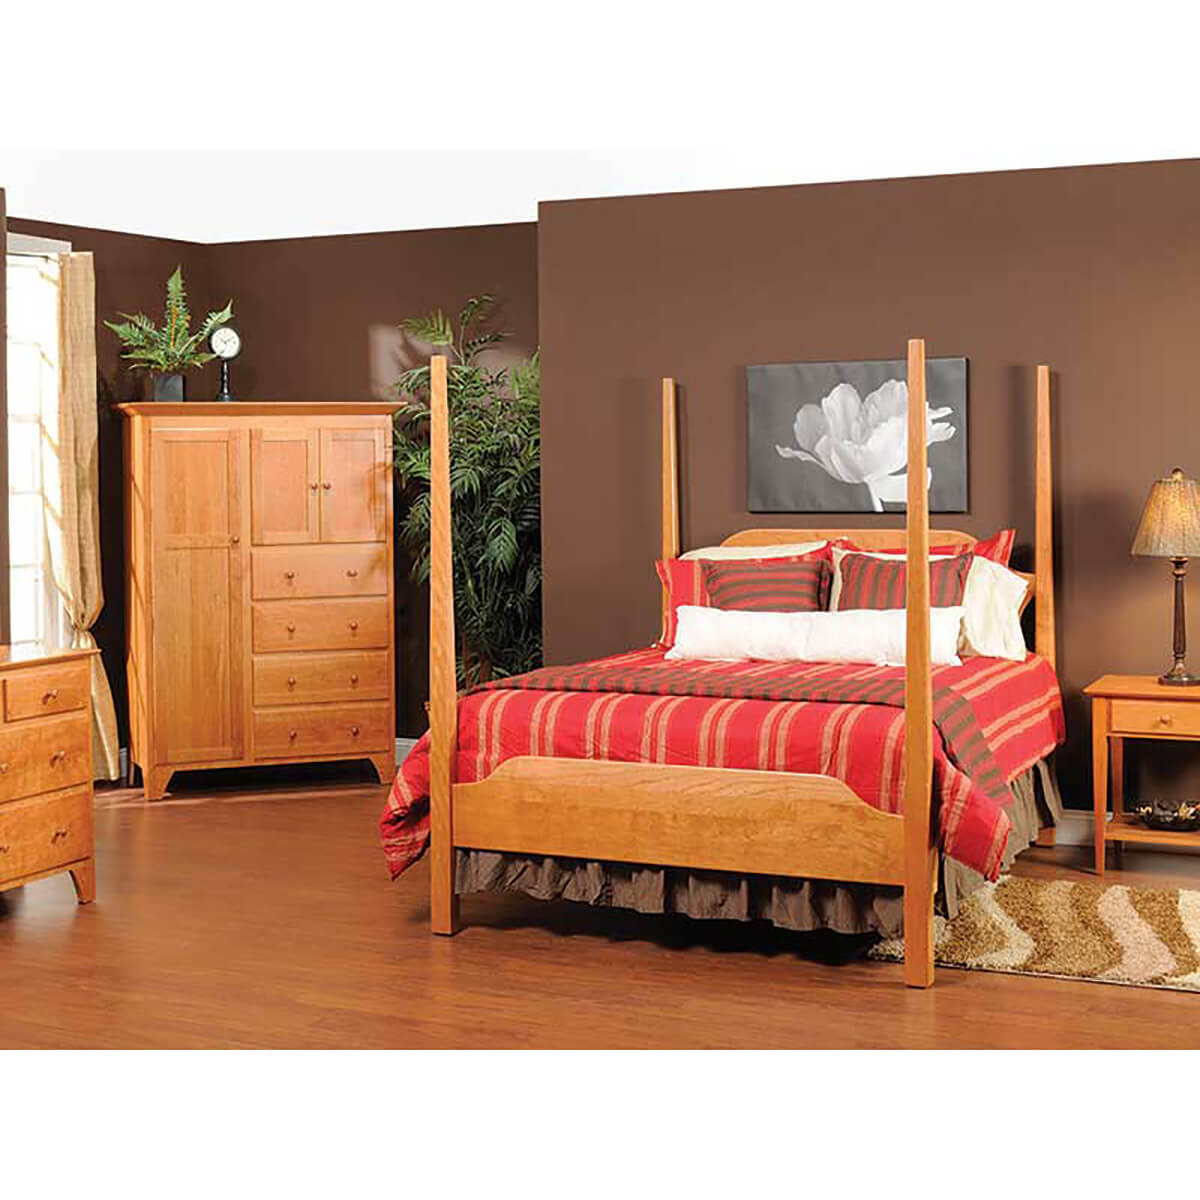 Read more about the article Shaker Village Bedroom Collection